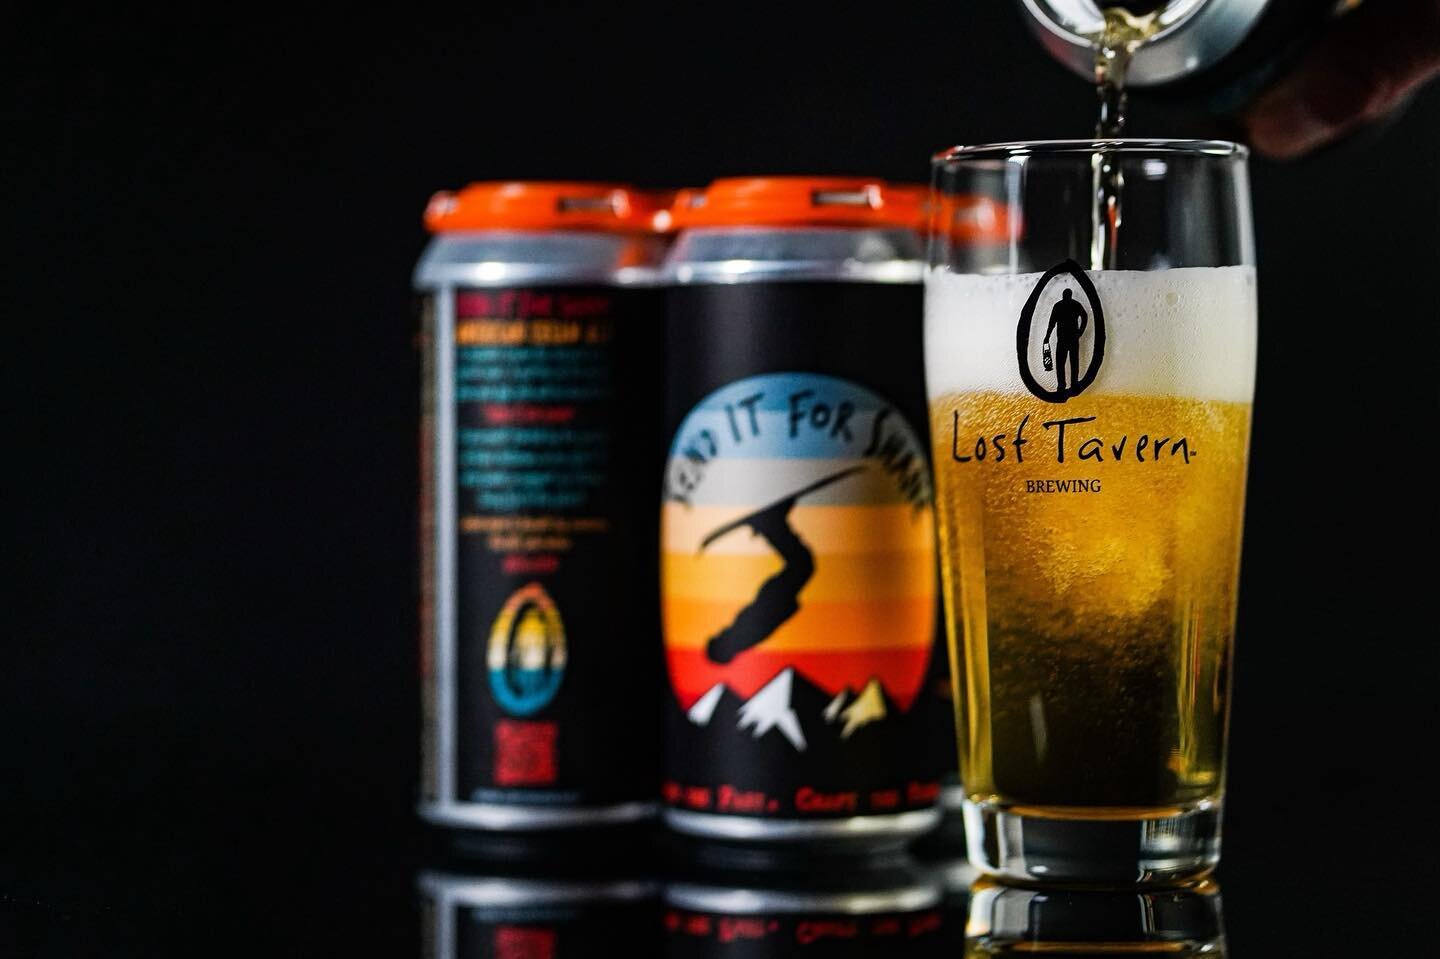 The countdown is on for the SI4S beer launch party that&rsquo;s this Saturday at Lost Tavern&rsquo;s Hellertown, PA location!🍻🥳

But guess what? If you&rsquo;re in PA, as of 3 PM TODAY the SI4S x Lost Tavern beer is available to purchase on draft o